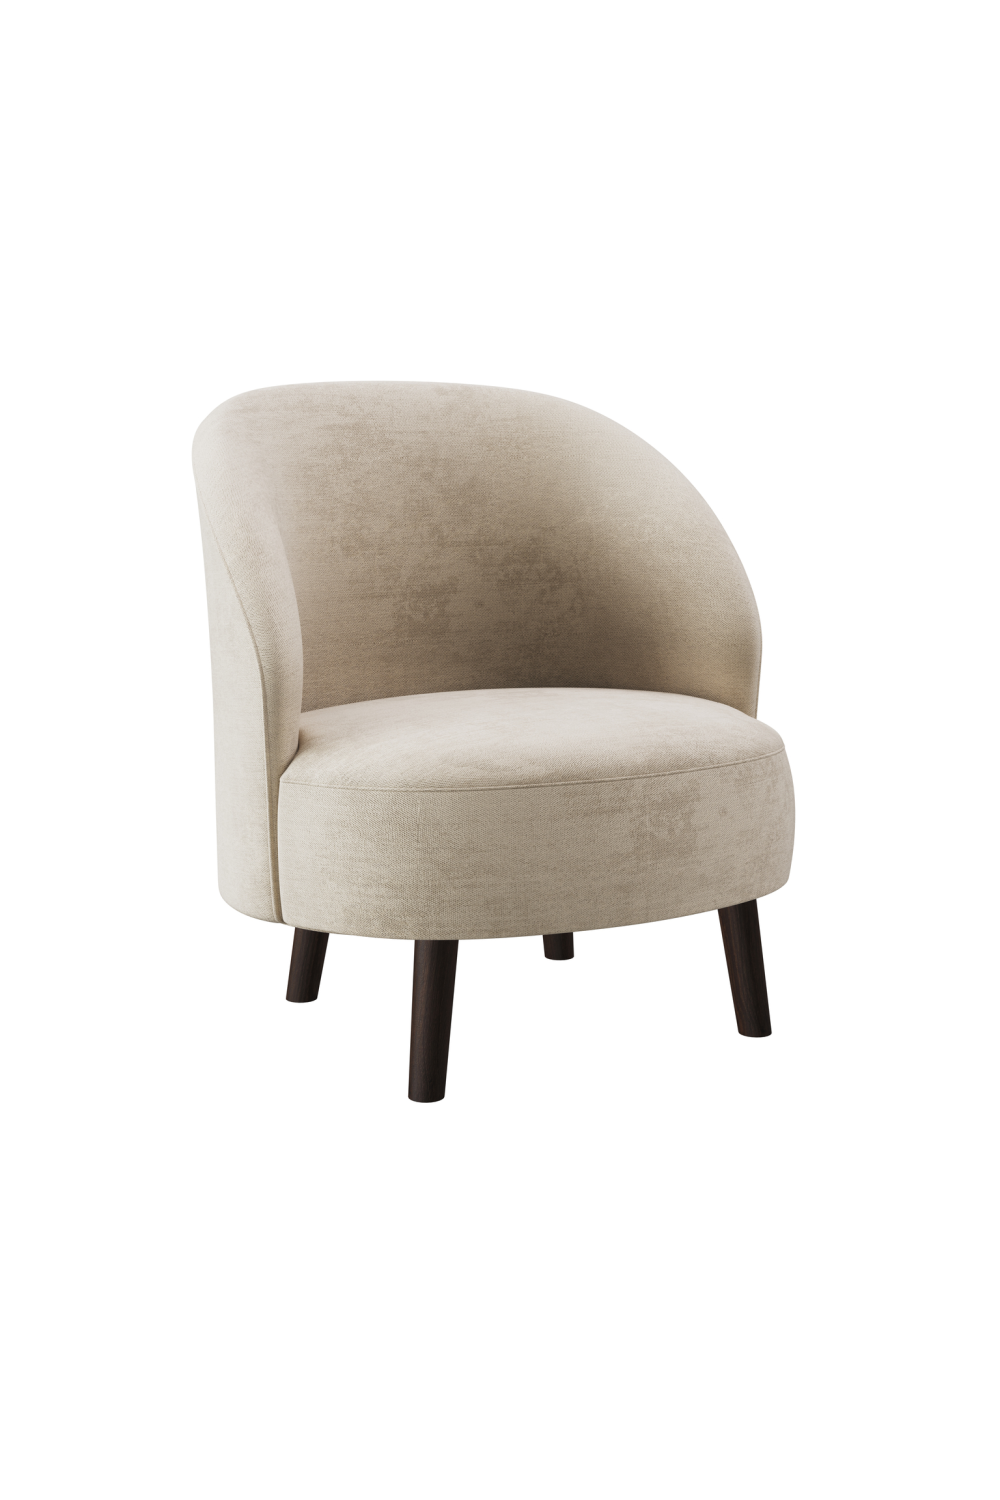 Curved Back Upholstered Lounge Chair | Dome Deco Bayron | Oroa.com